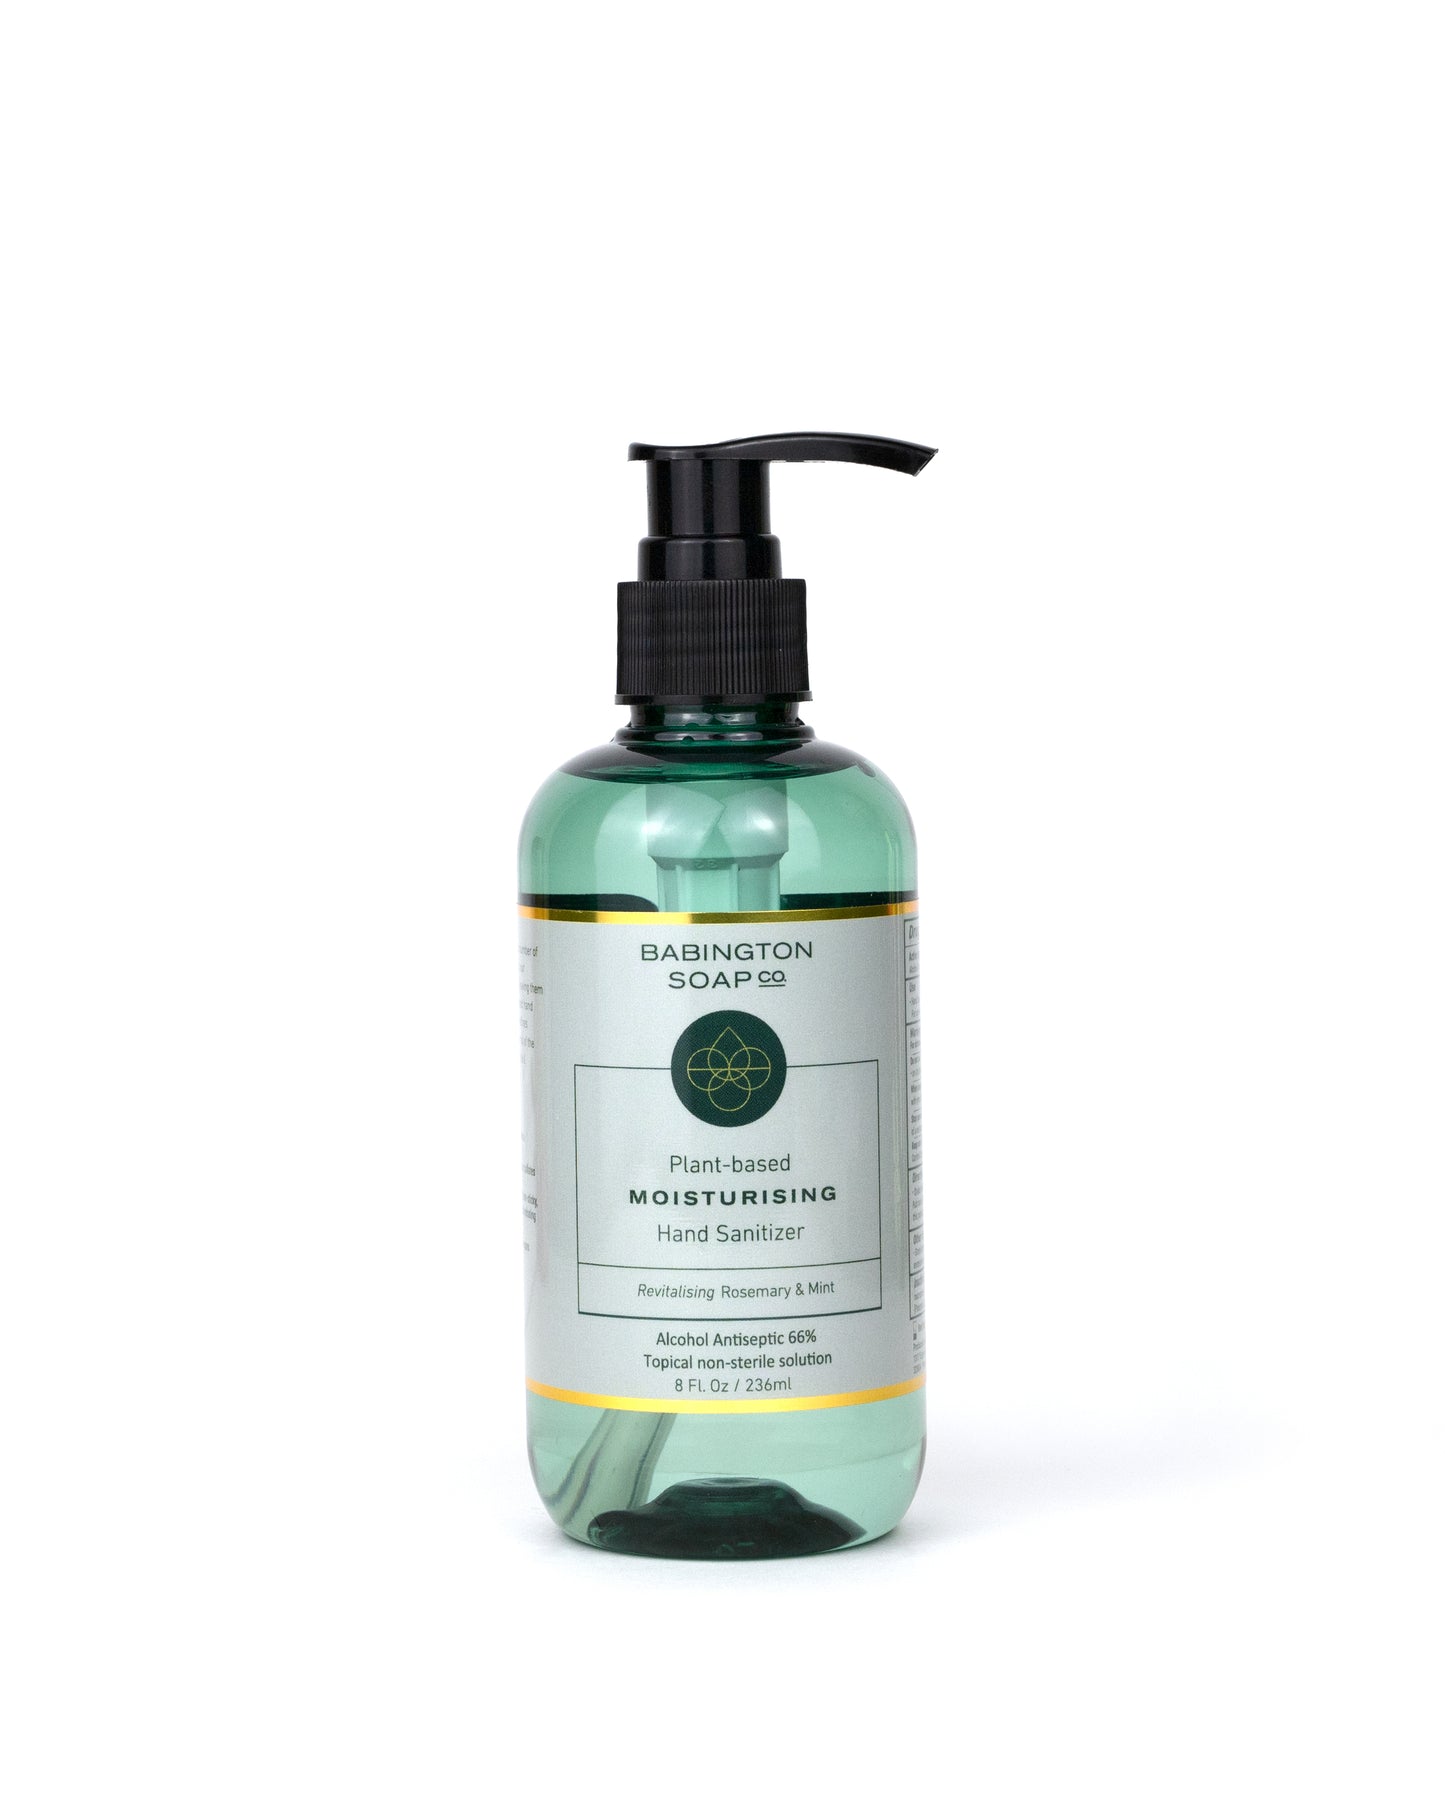 2-in-1 plant-based Moisturizer gel with an antibacterial - Revitalising Rosemary & Mint